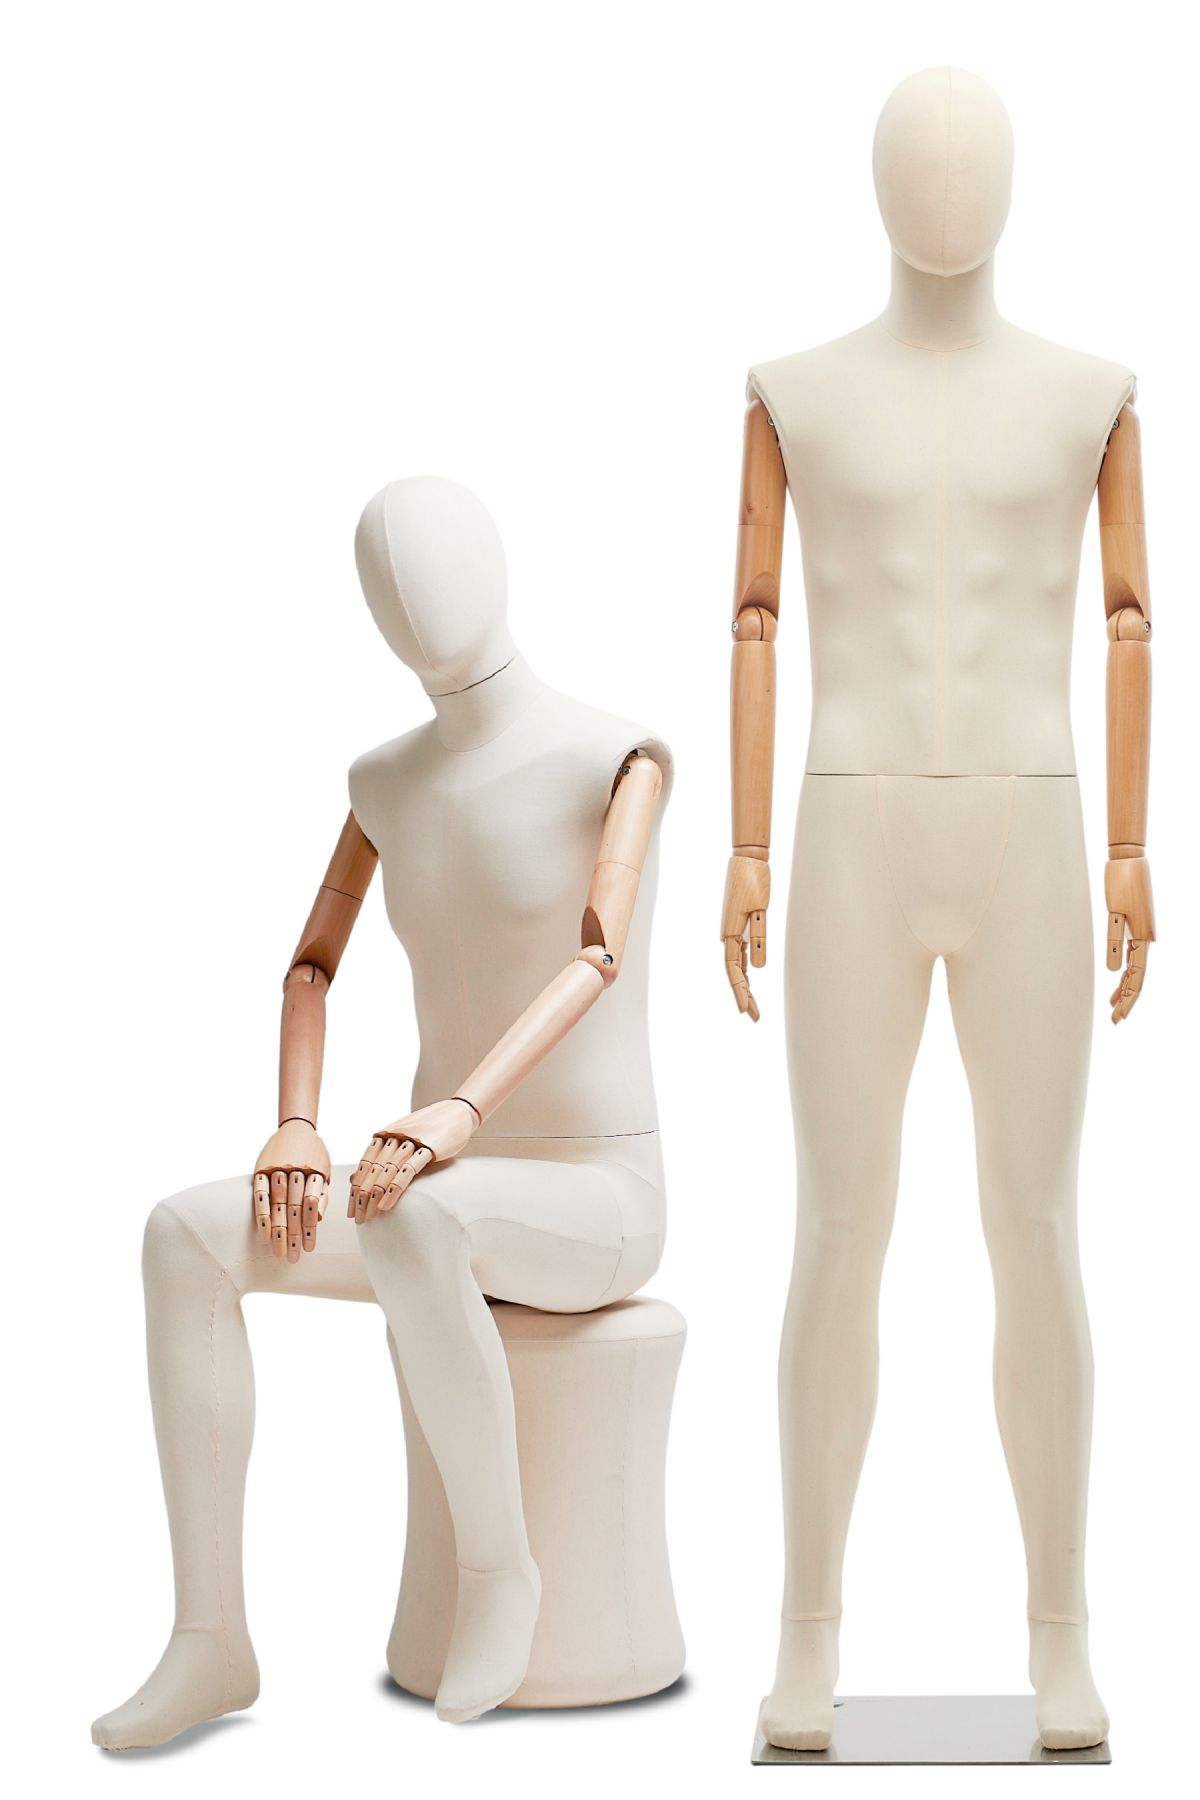 Full Body Glossy Male Mannequin Pose 1, Display Warehouse